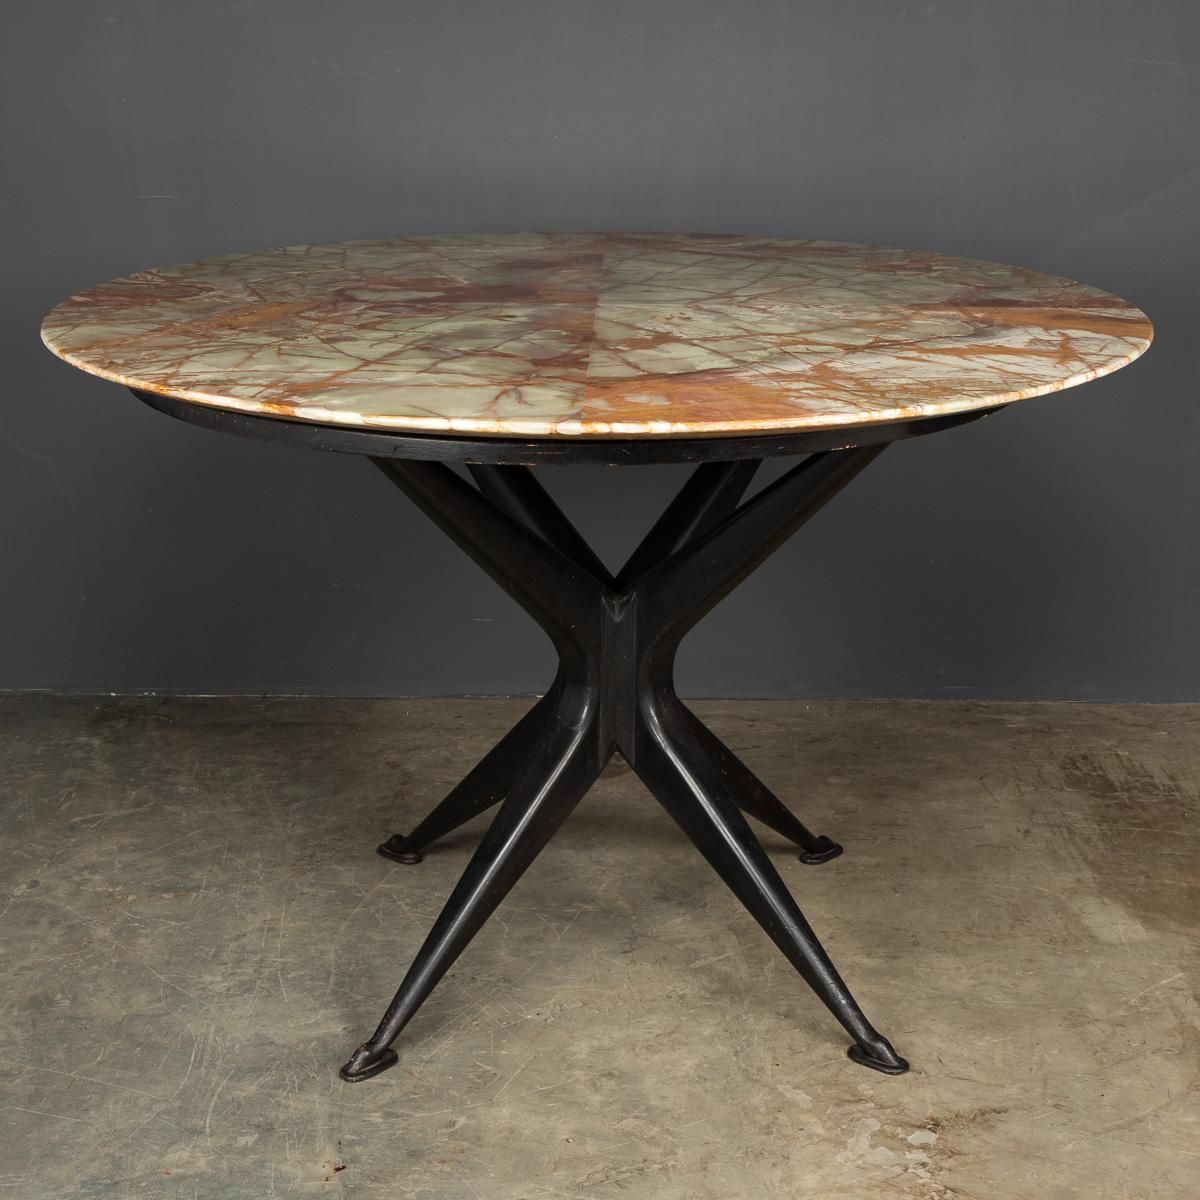 Mid-20th century Onyx top table on an ebonised base. A truly striking piece of designer furniture.

Condition
In great condition - wear consistent with age.

Size
Diameter: 120cm
Height: 78cm.